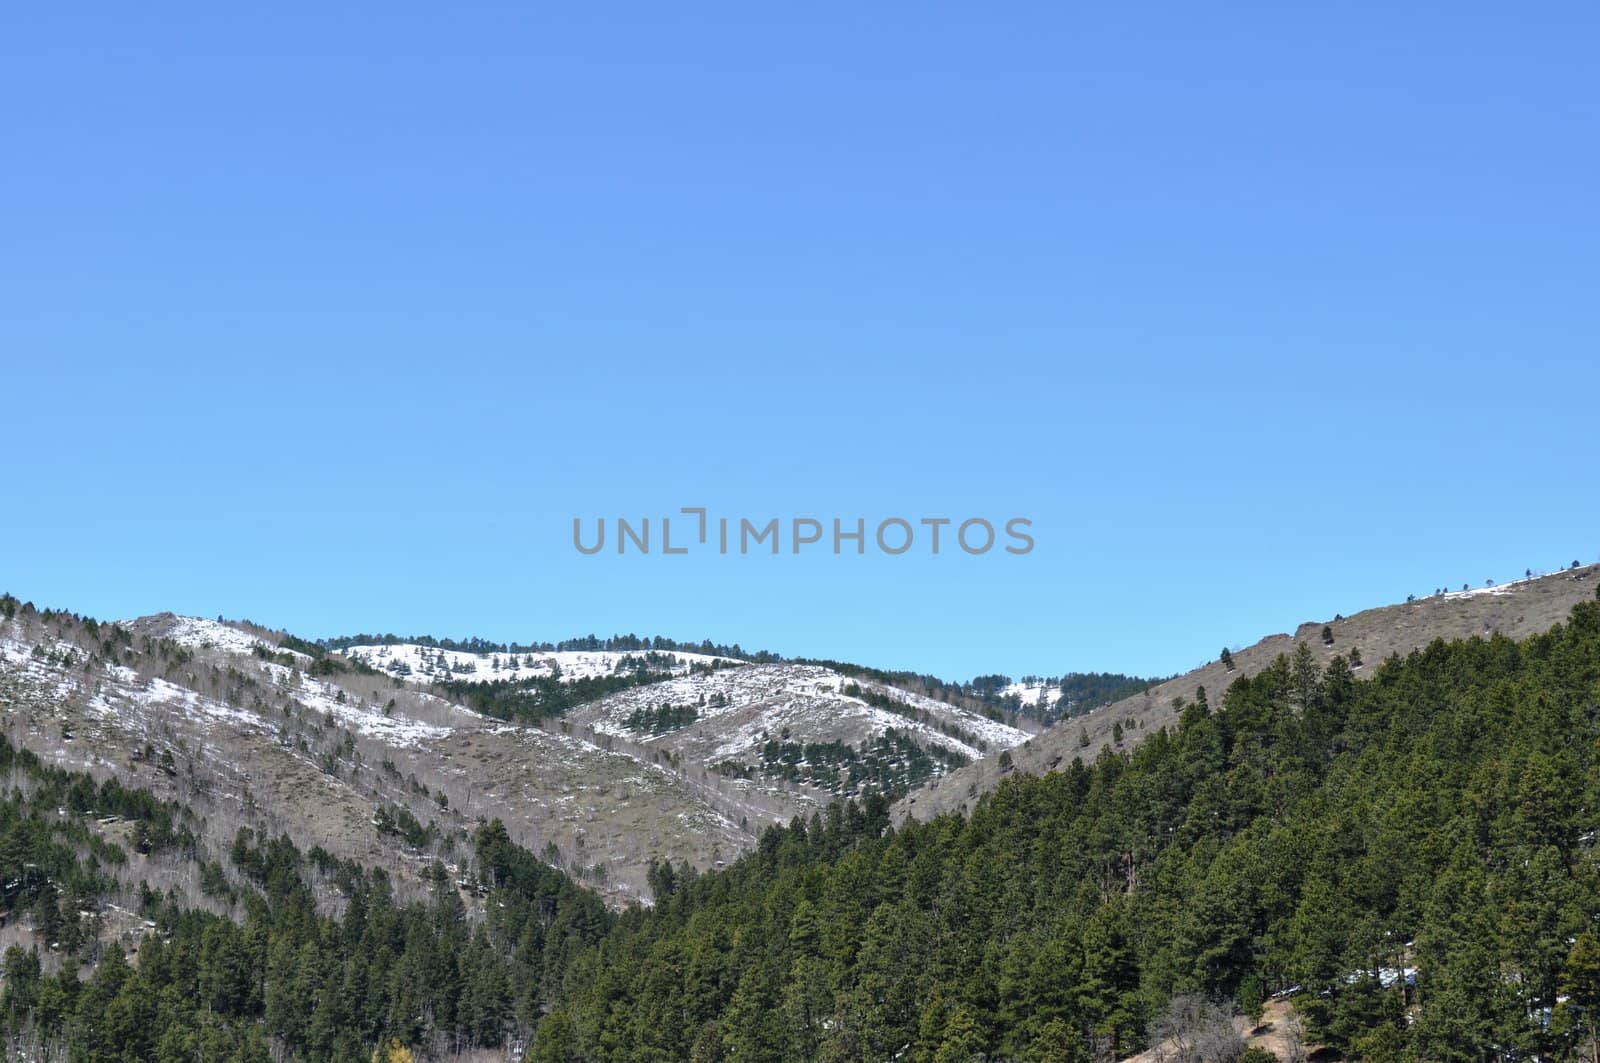 Black hills and sky background by RefocusPhoto